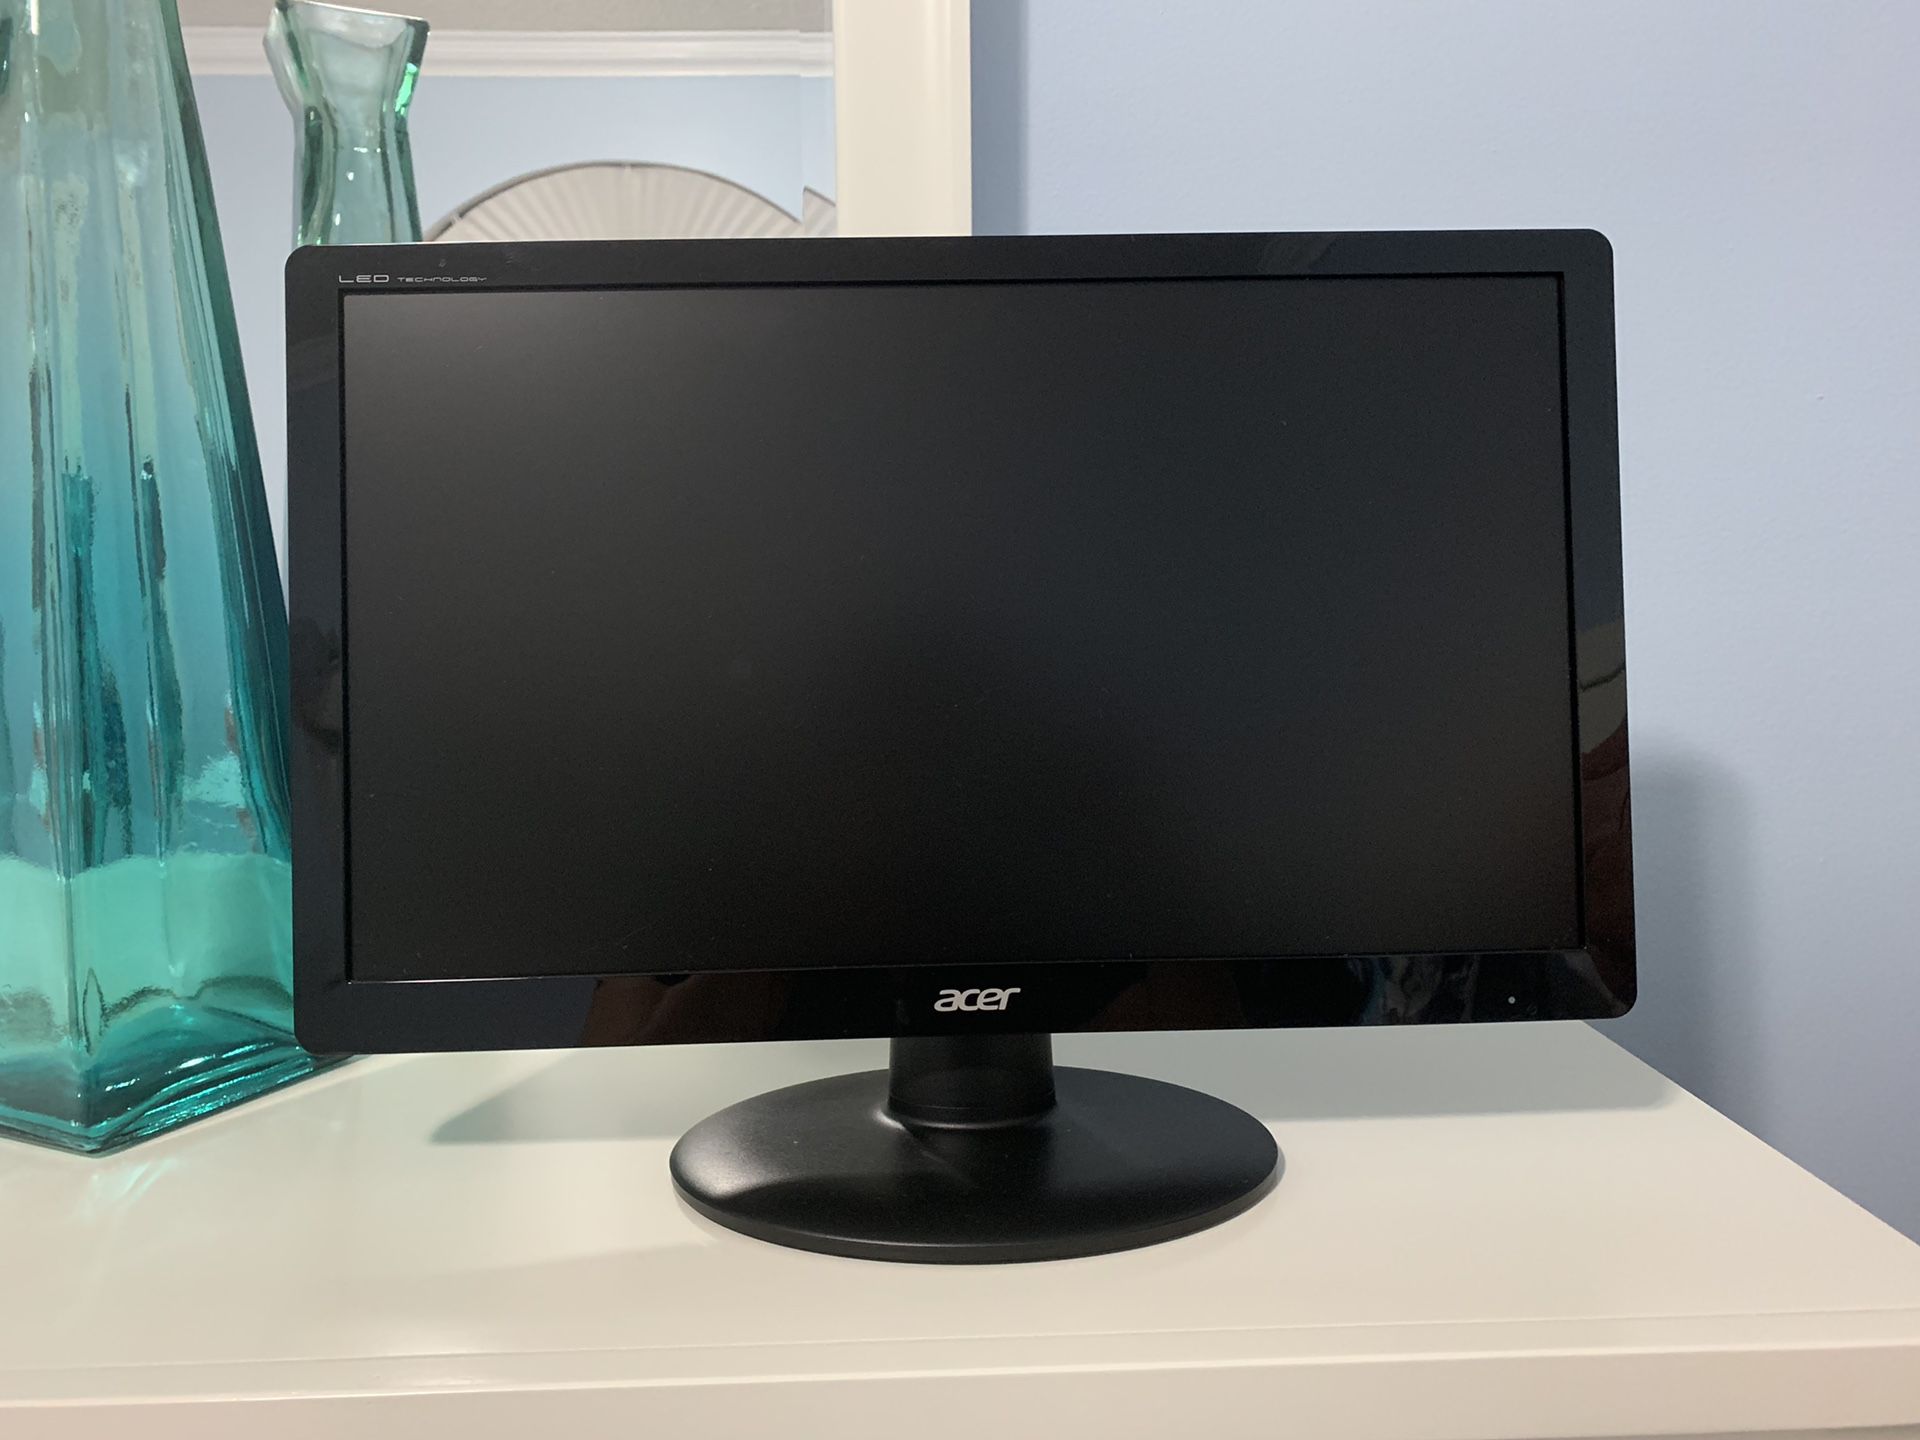 ACER computer monitor brand new